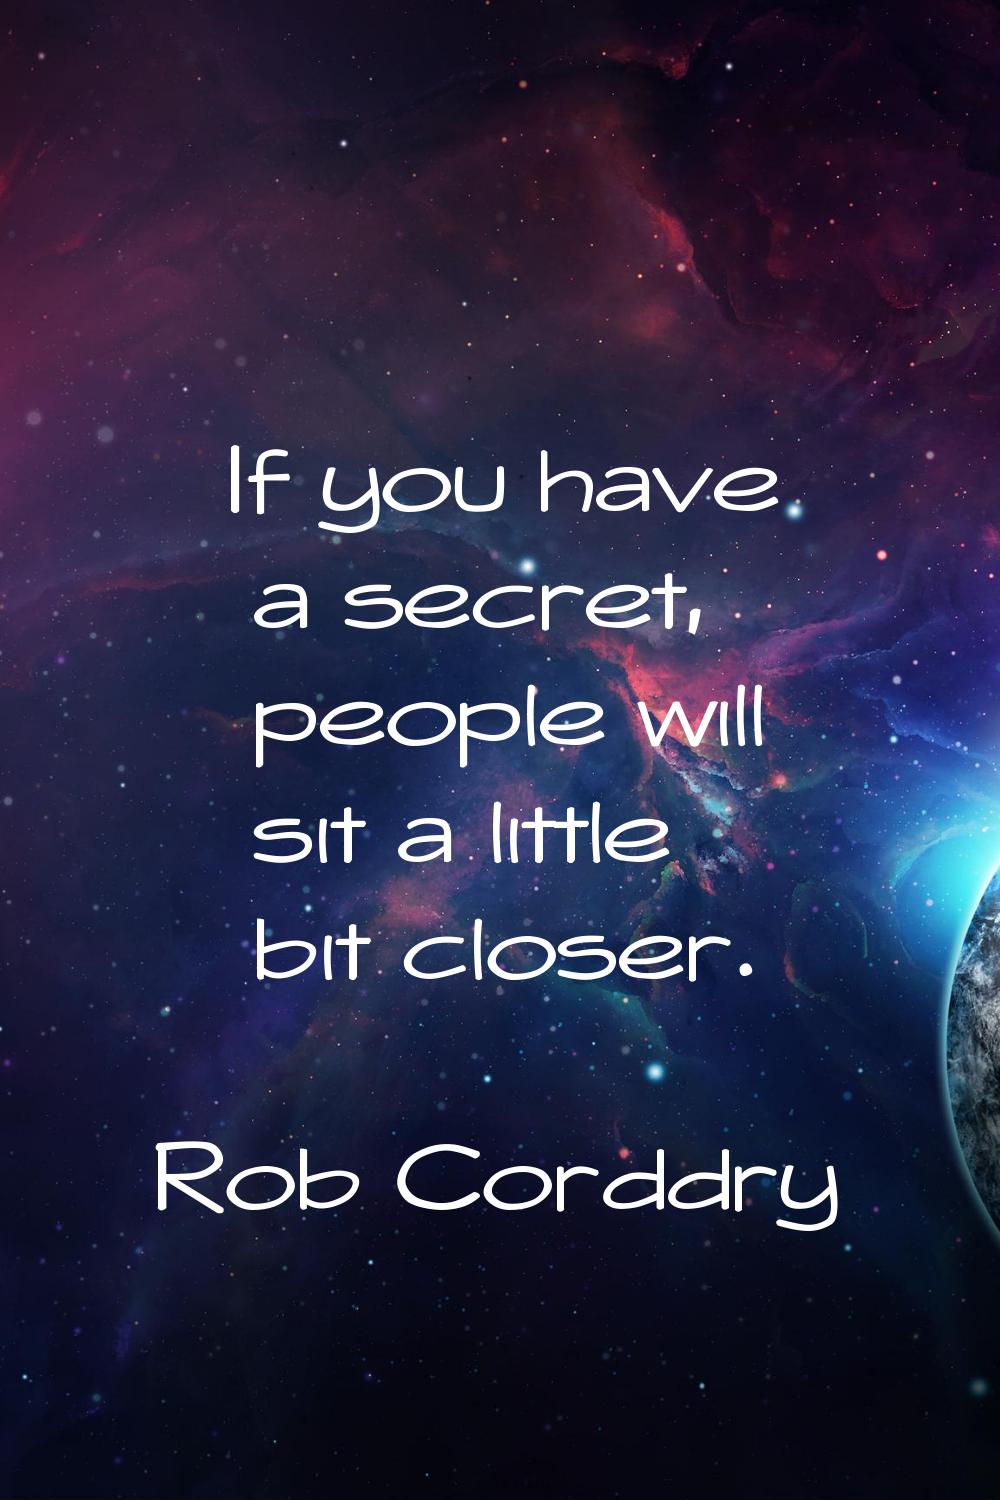 If you have a secret, people will sit a little bit closer.